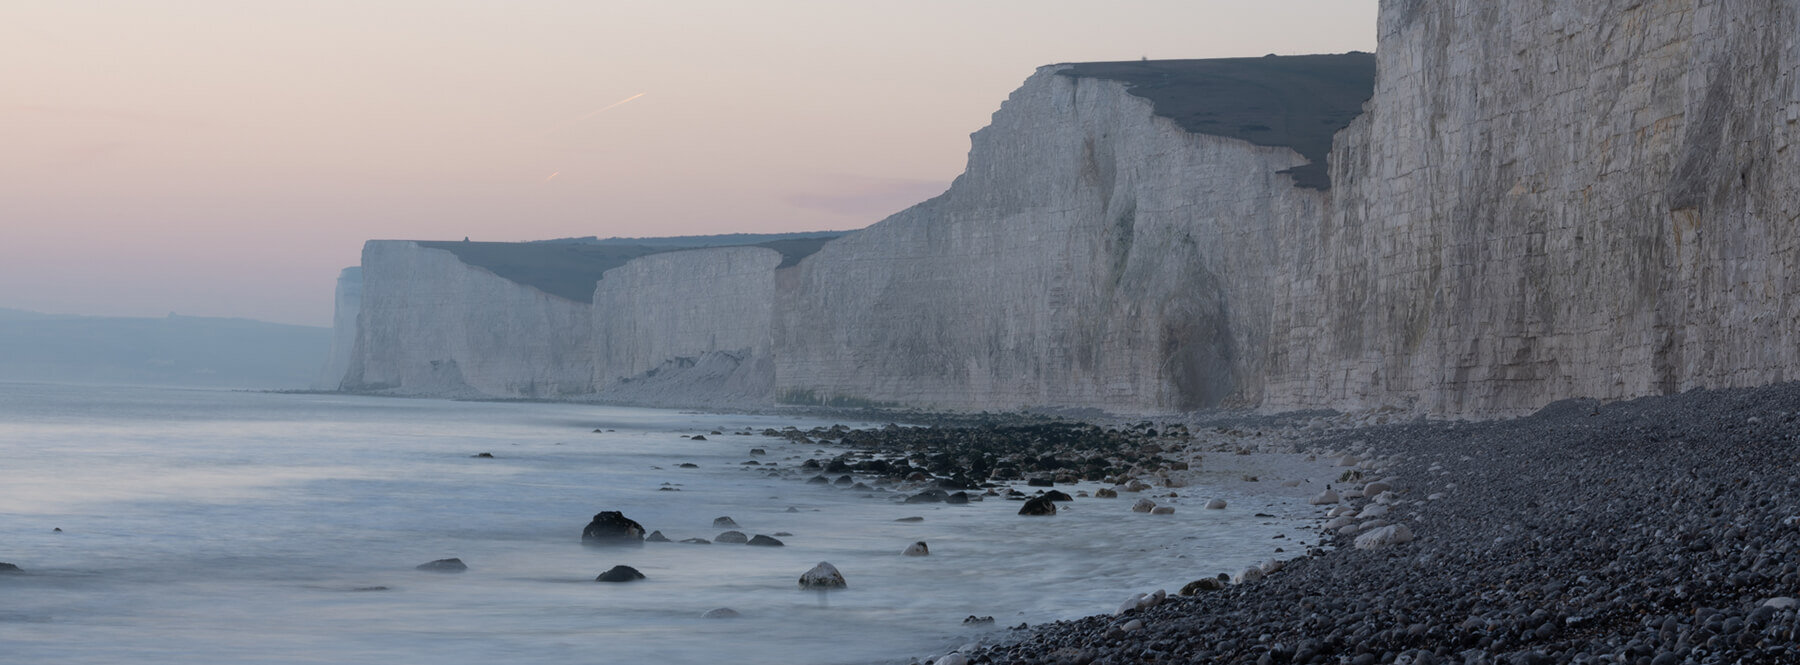 England's best landscape locations: East Sussex